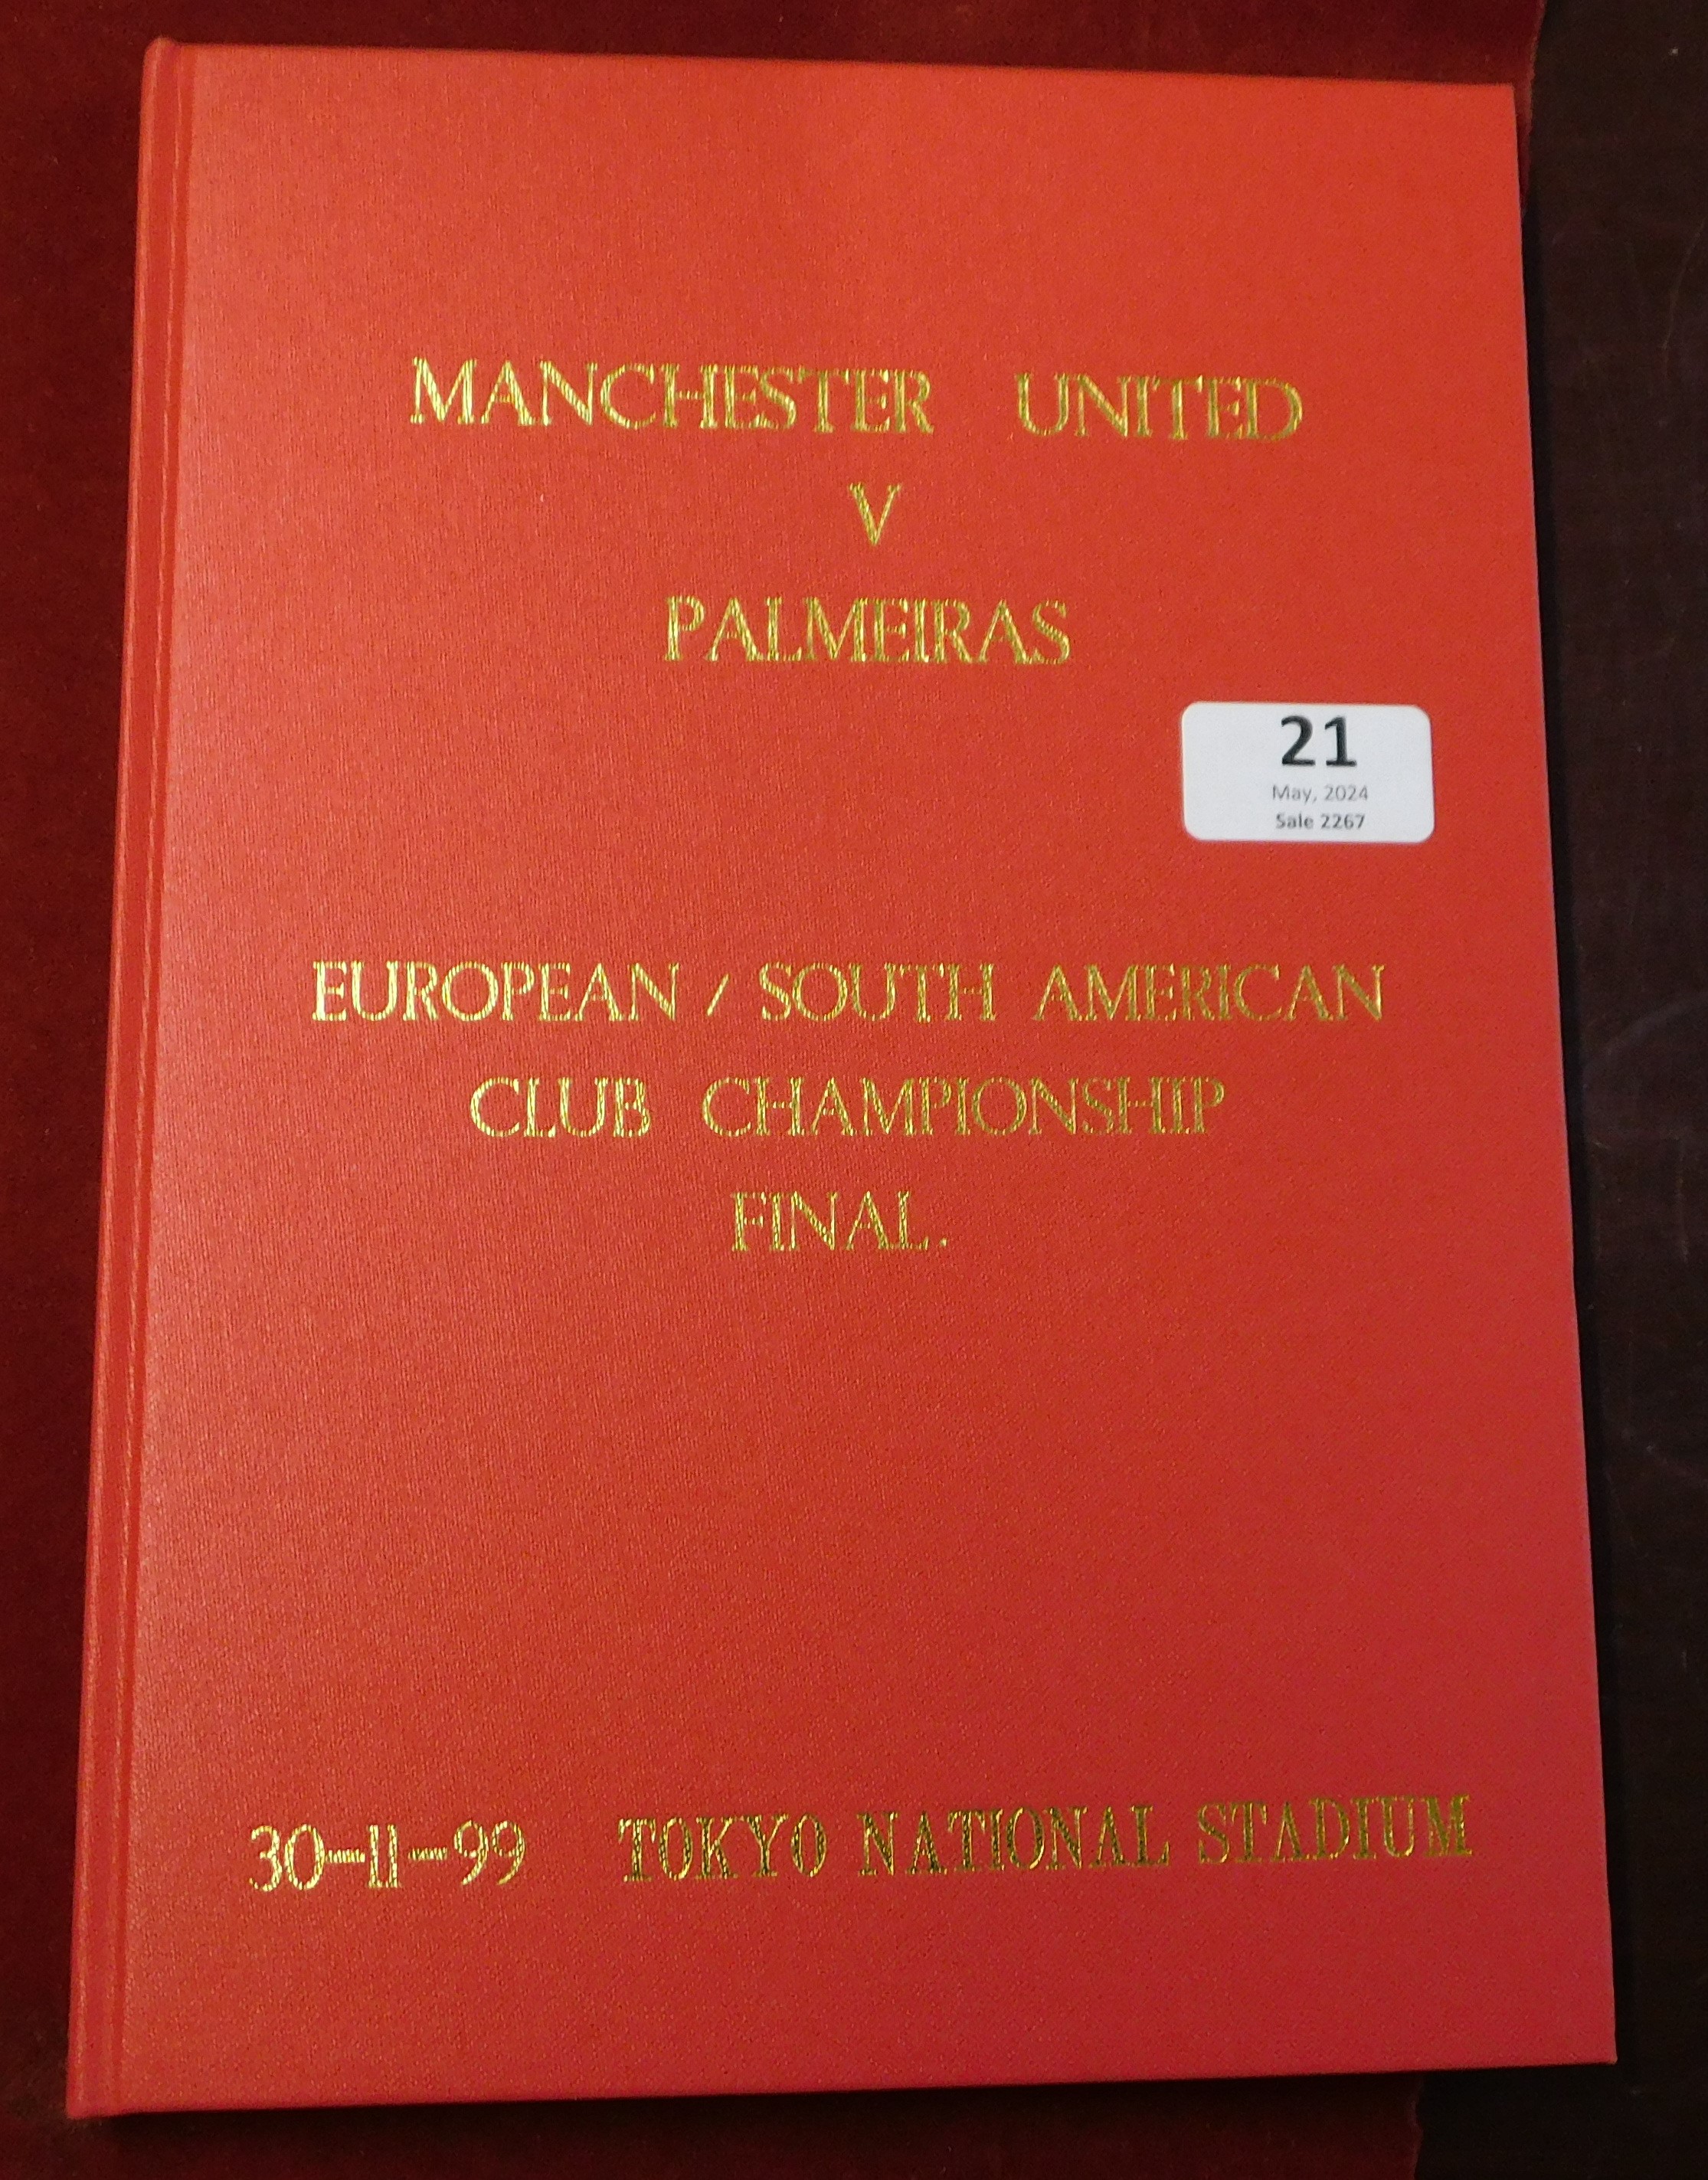 Bound programme for the Manchester United v Palmeiras World Club Championship Final in Tokyo 30th